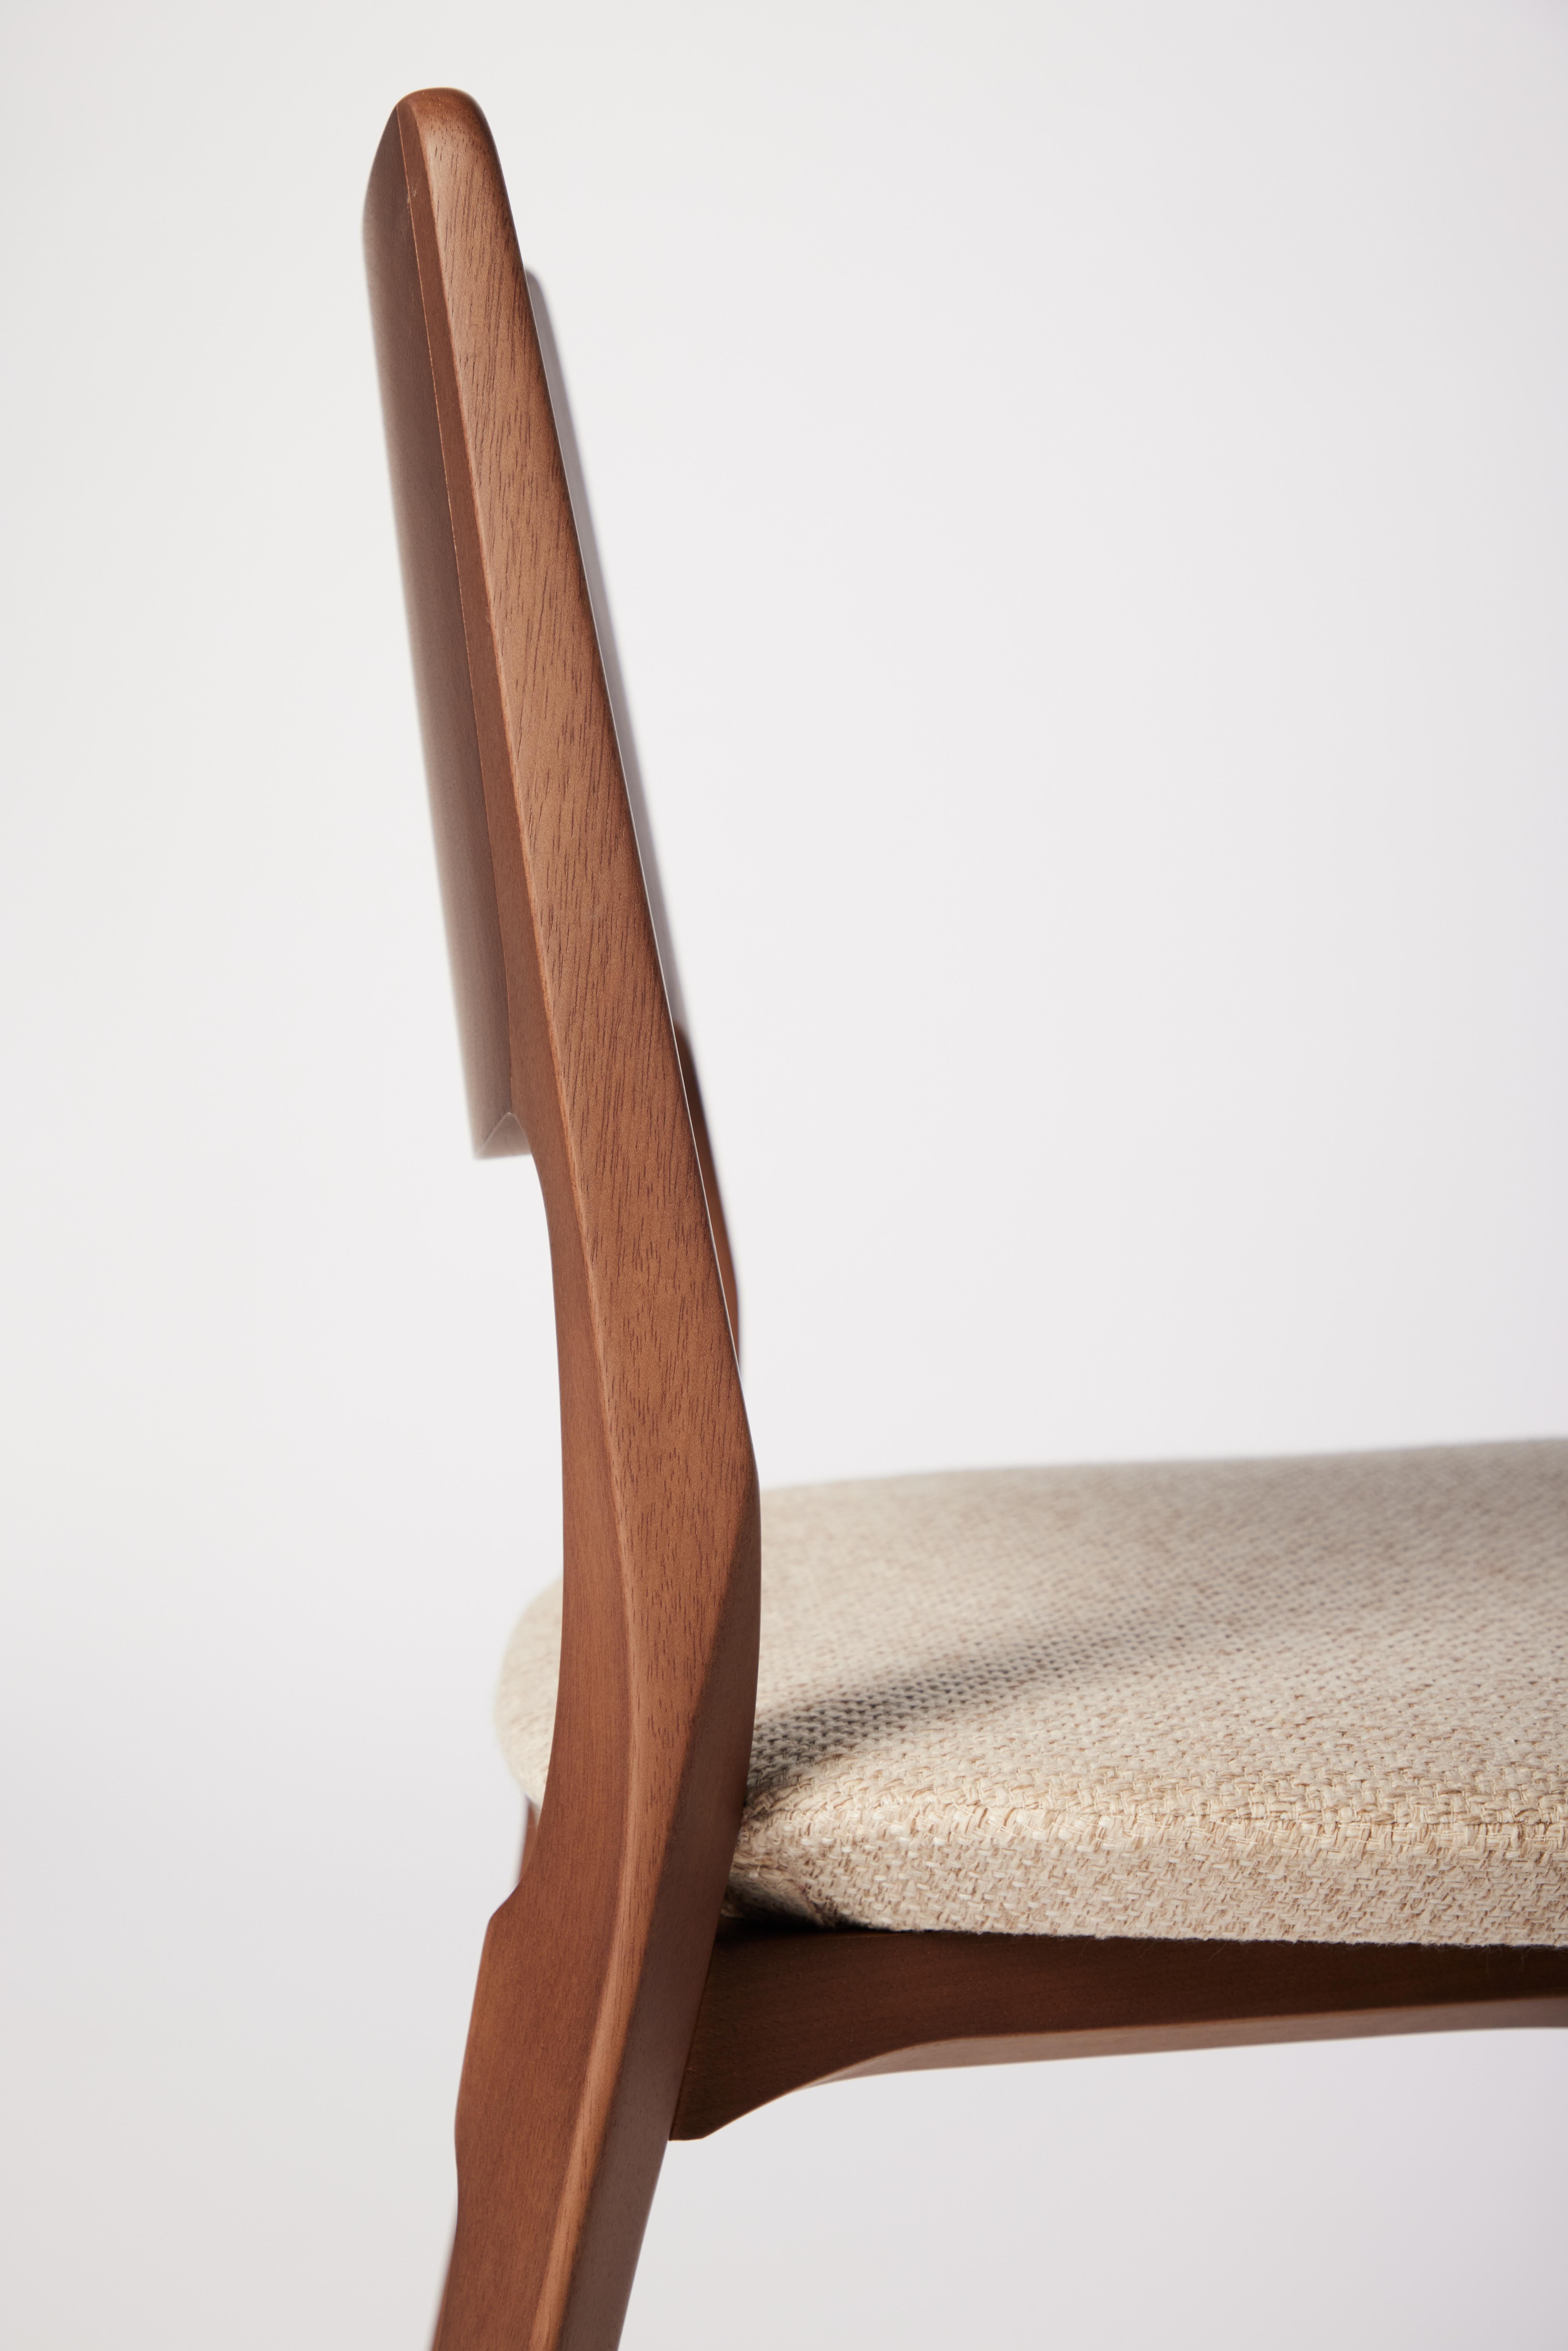 Brazilian Modern Style Aurora Chair Sculpted in Walnut Finish No Arms, Upholstered Seat For Sale